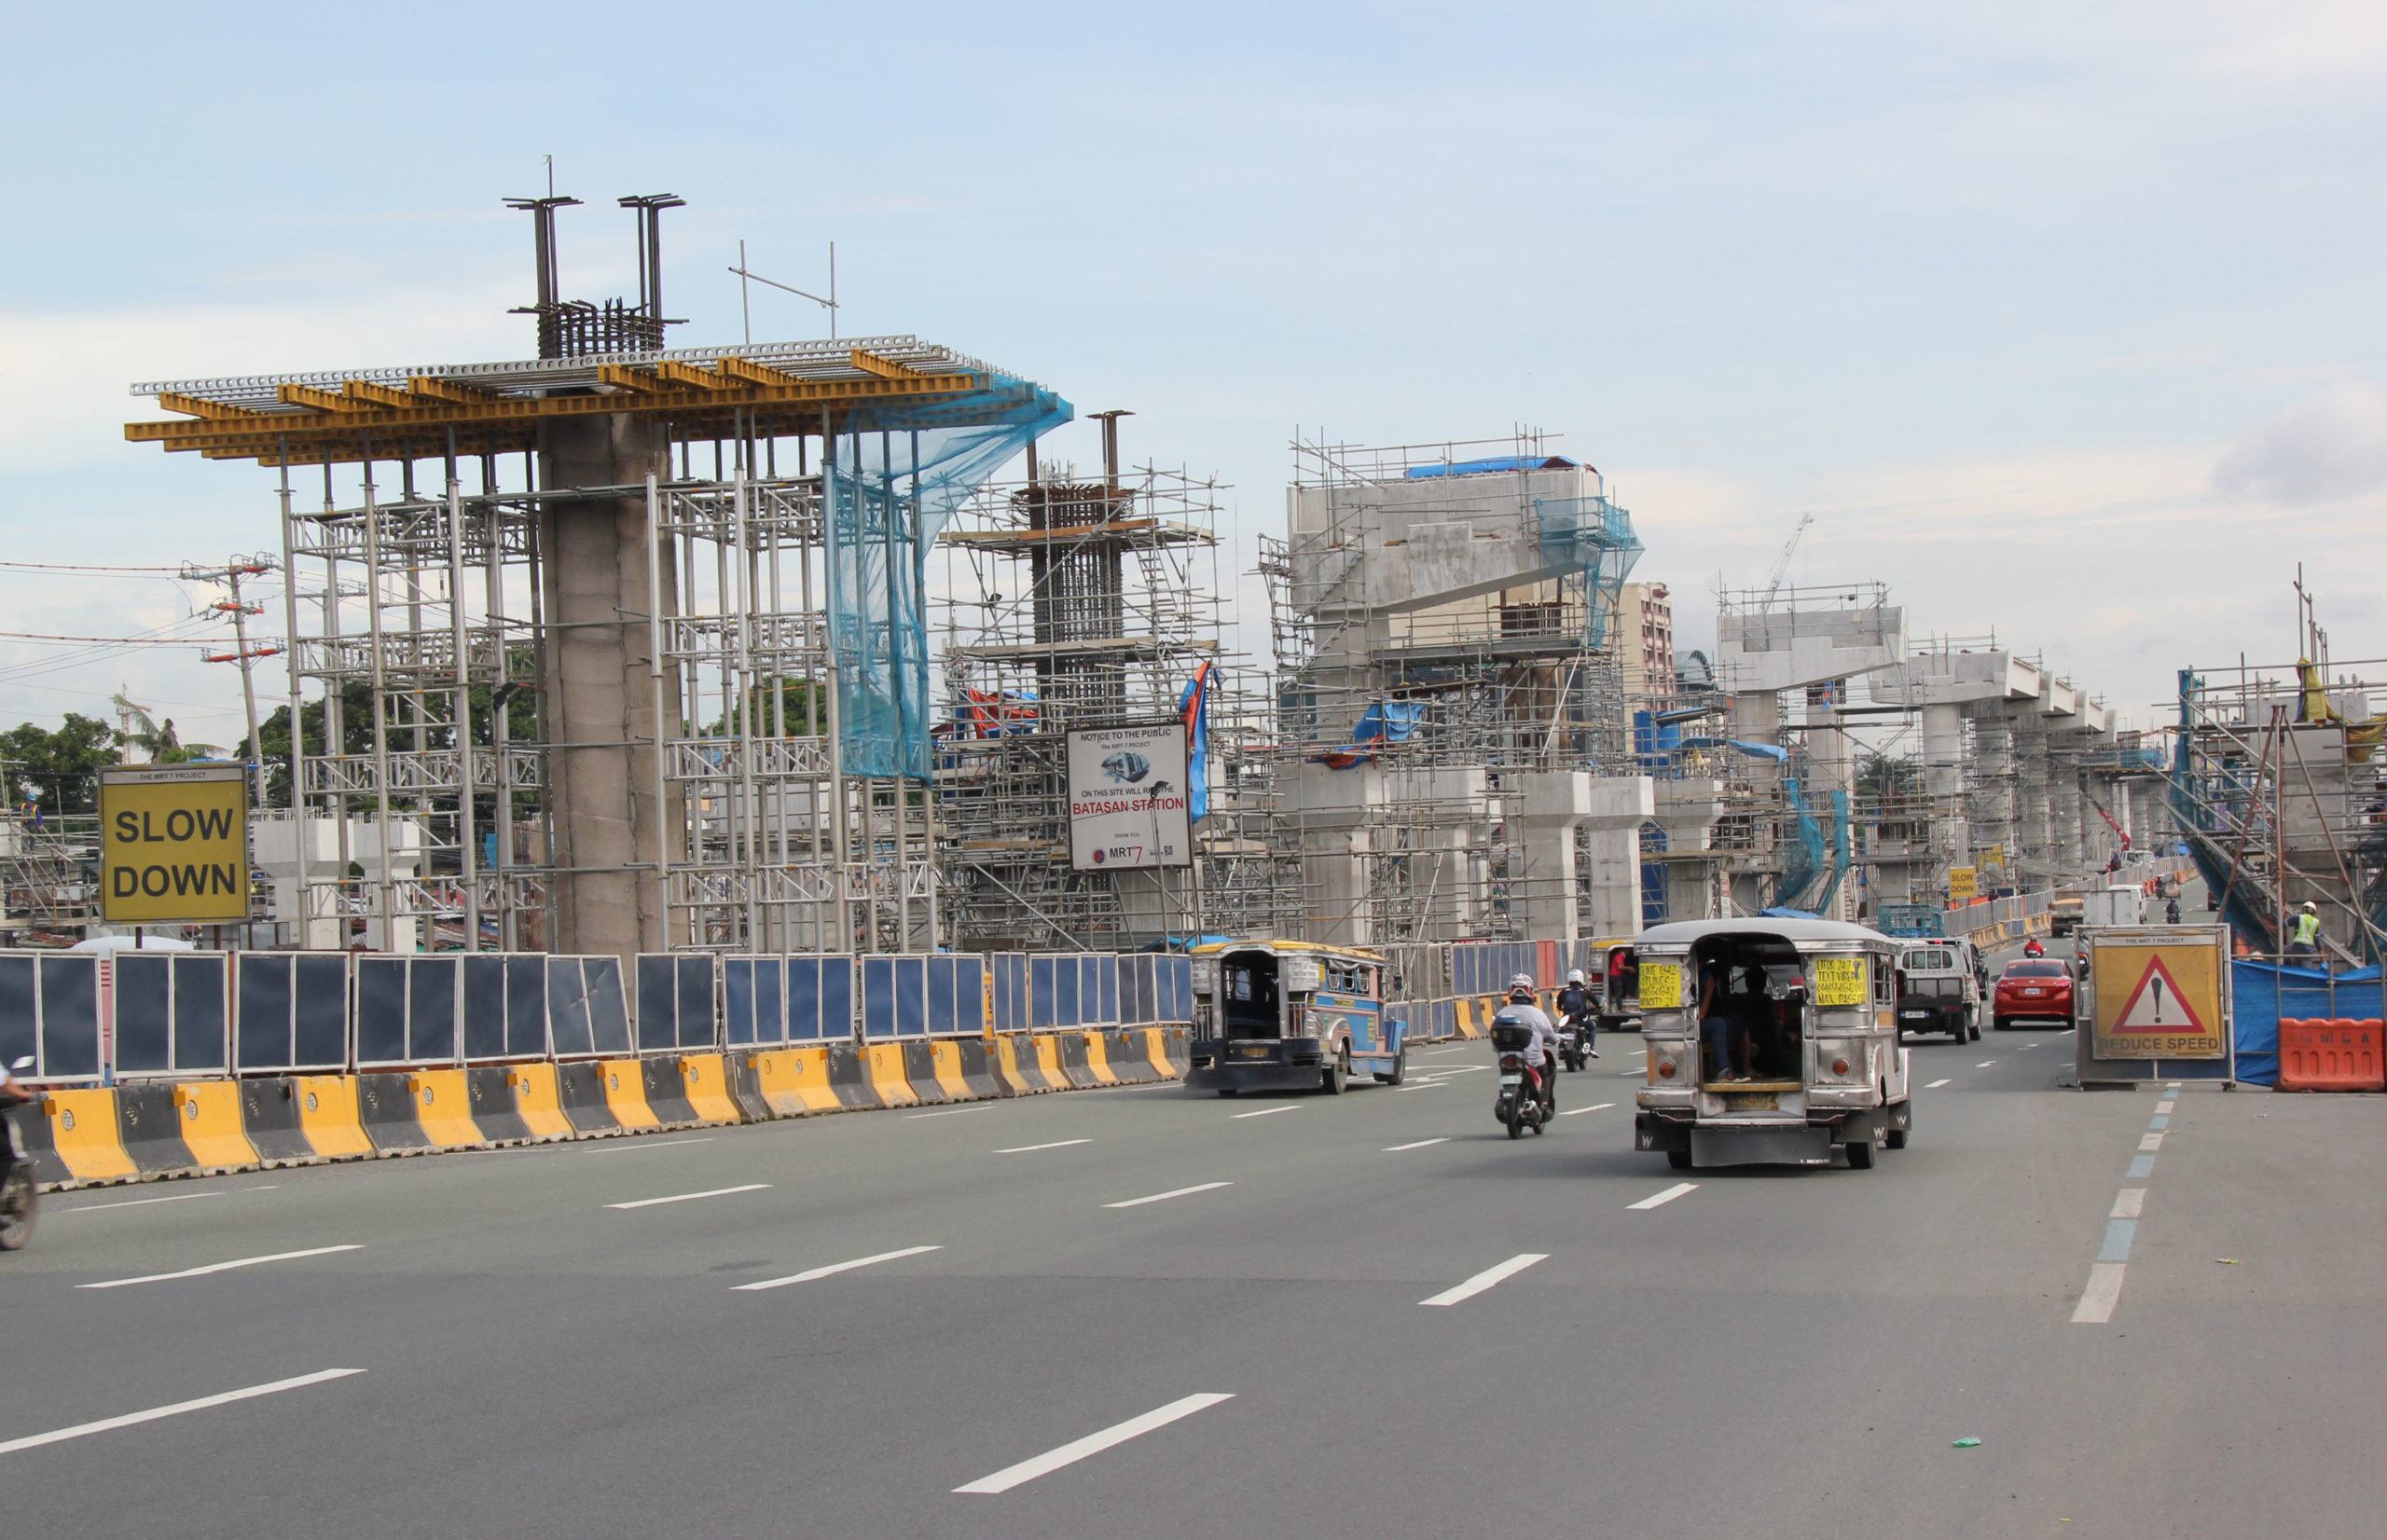 The Philippines has ambitious rail plans. Pictured here is work under way in 2018 on Batasan station in Quezon City, part of the Metro Manila Rail Transit 7 scheme (Gil Calinga for the official Philippine News Agency/Public domain)